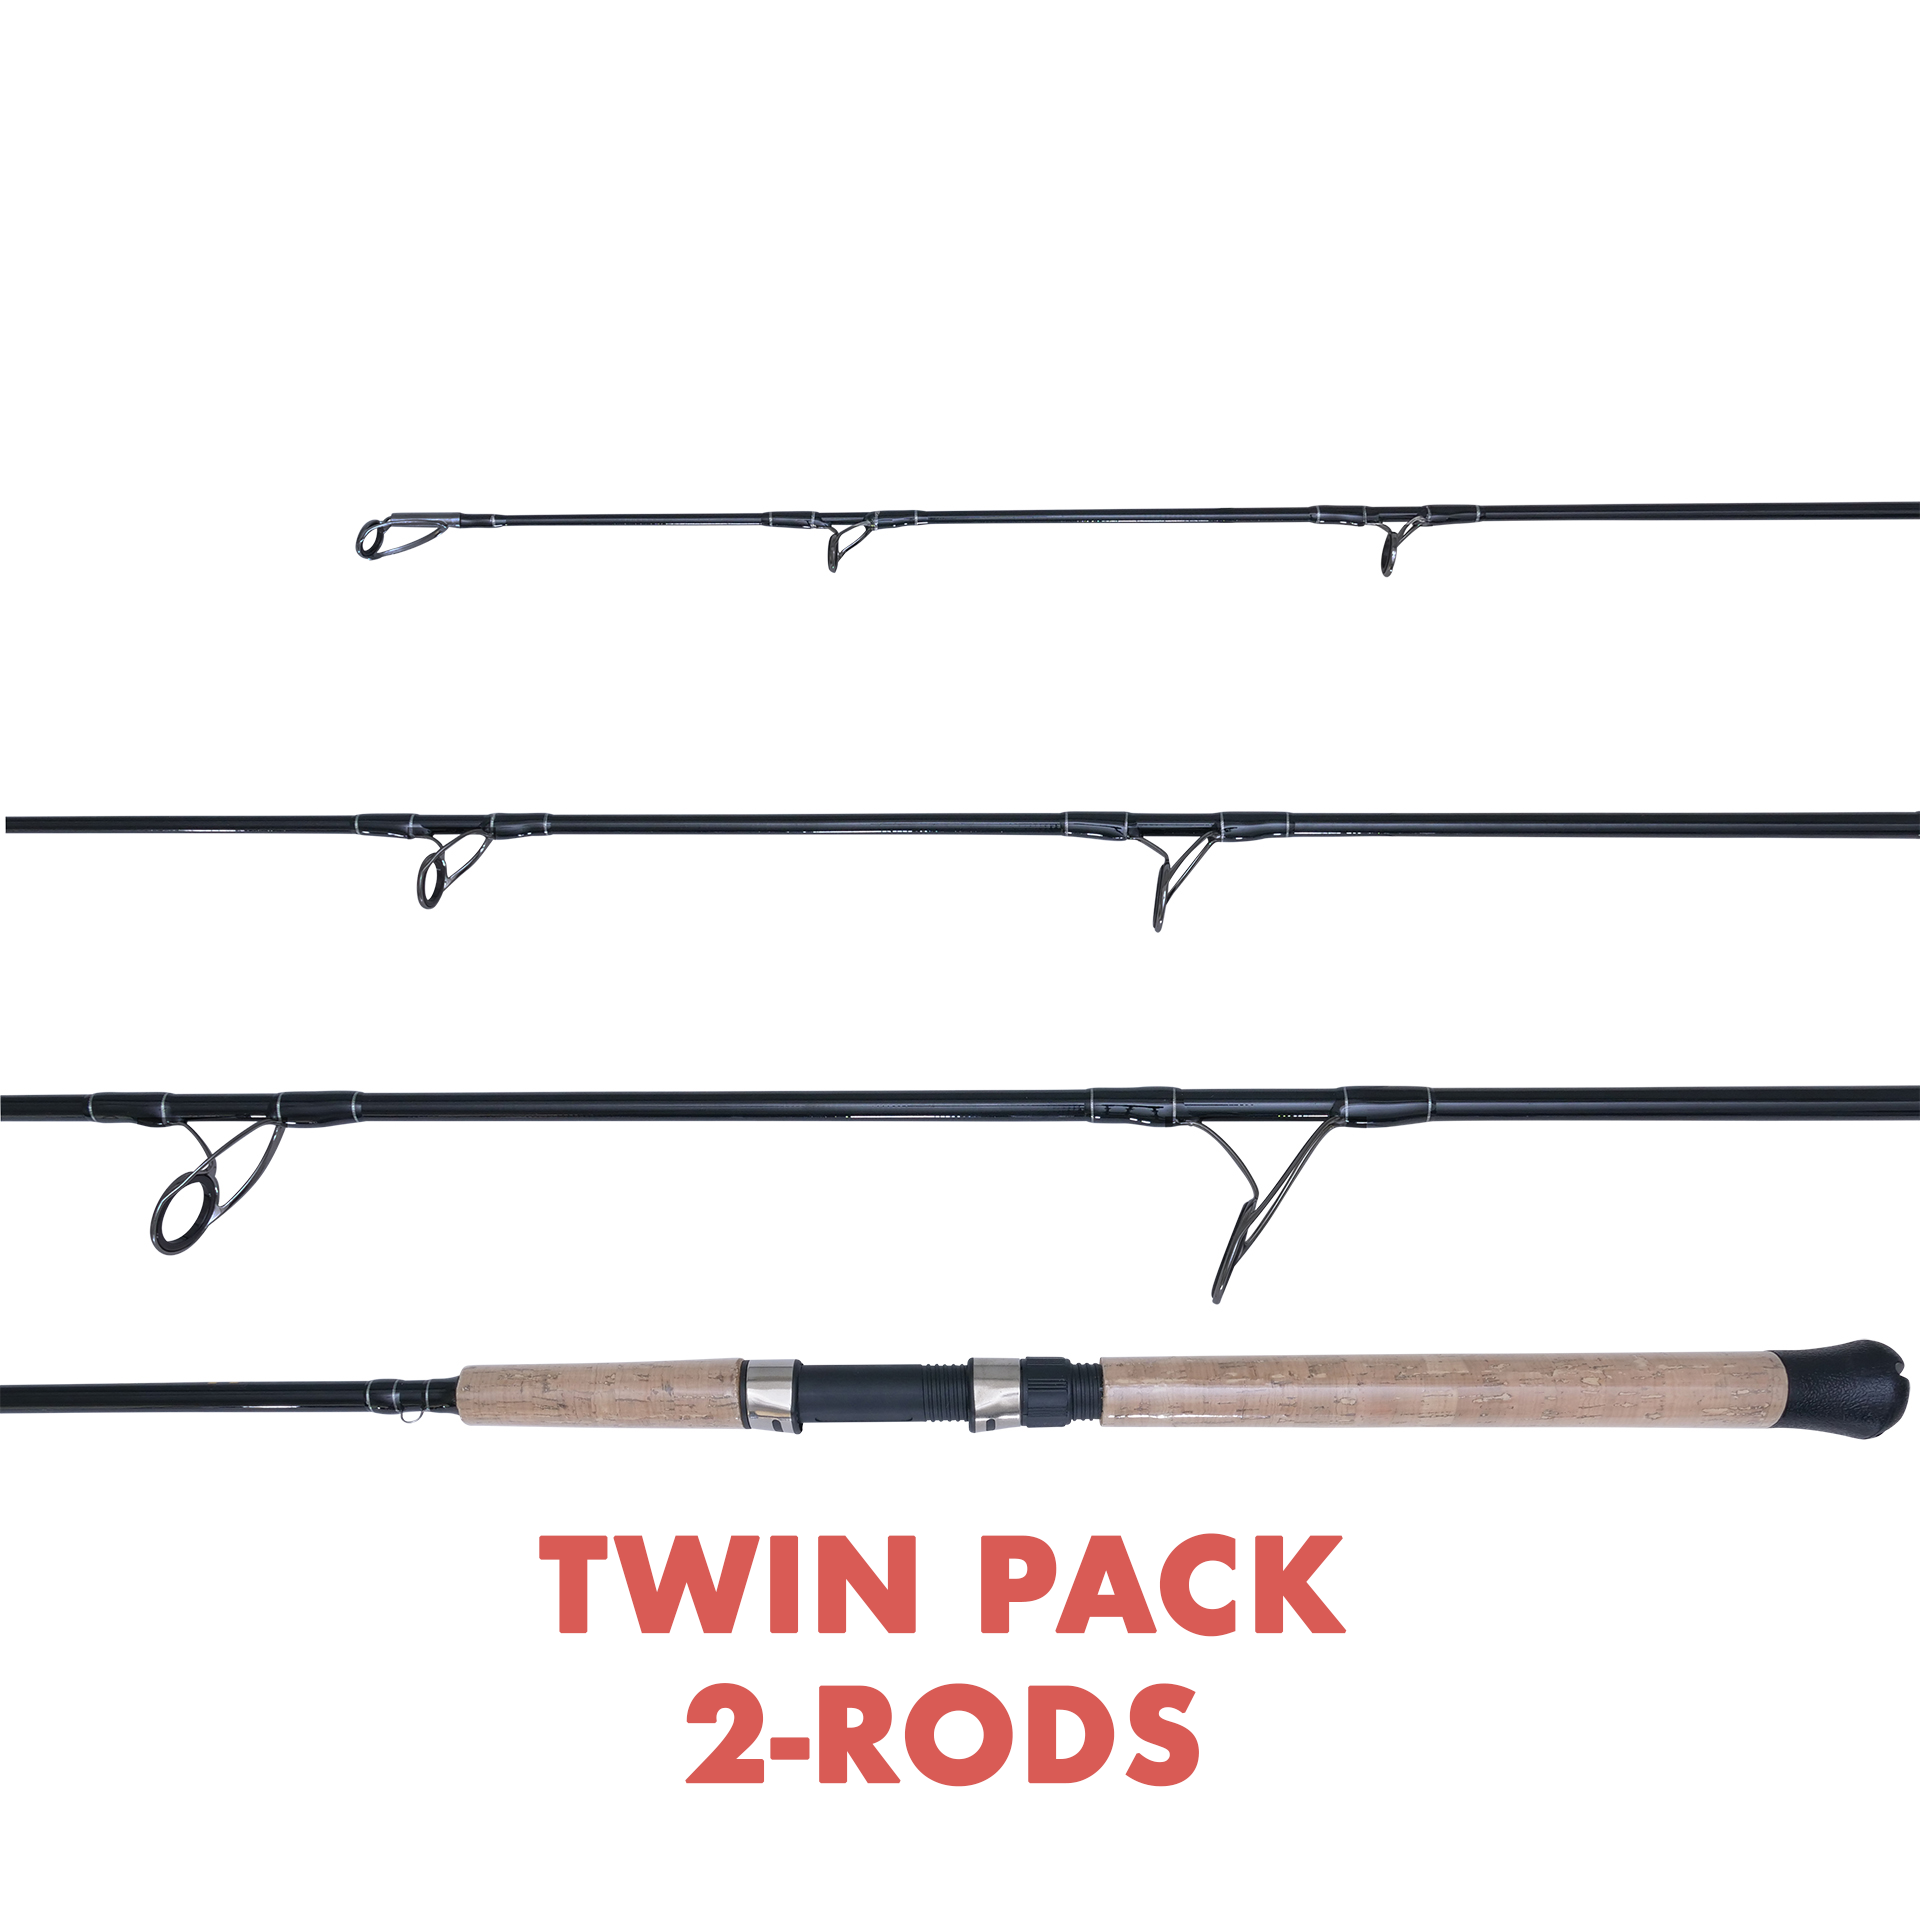 TWIN PACK Hybrid Inshore / Offshore Spinning Rod: Mod-Fast Action 7' MH (1oz - 4oz)